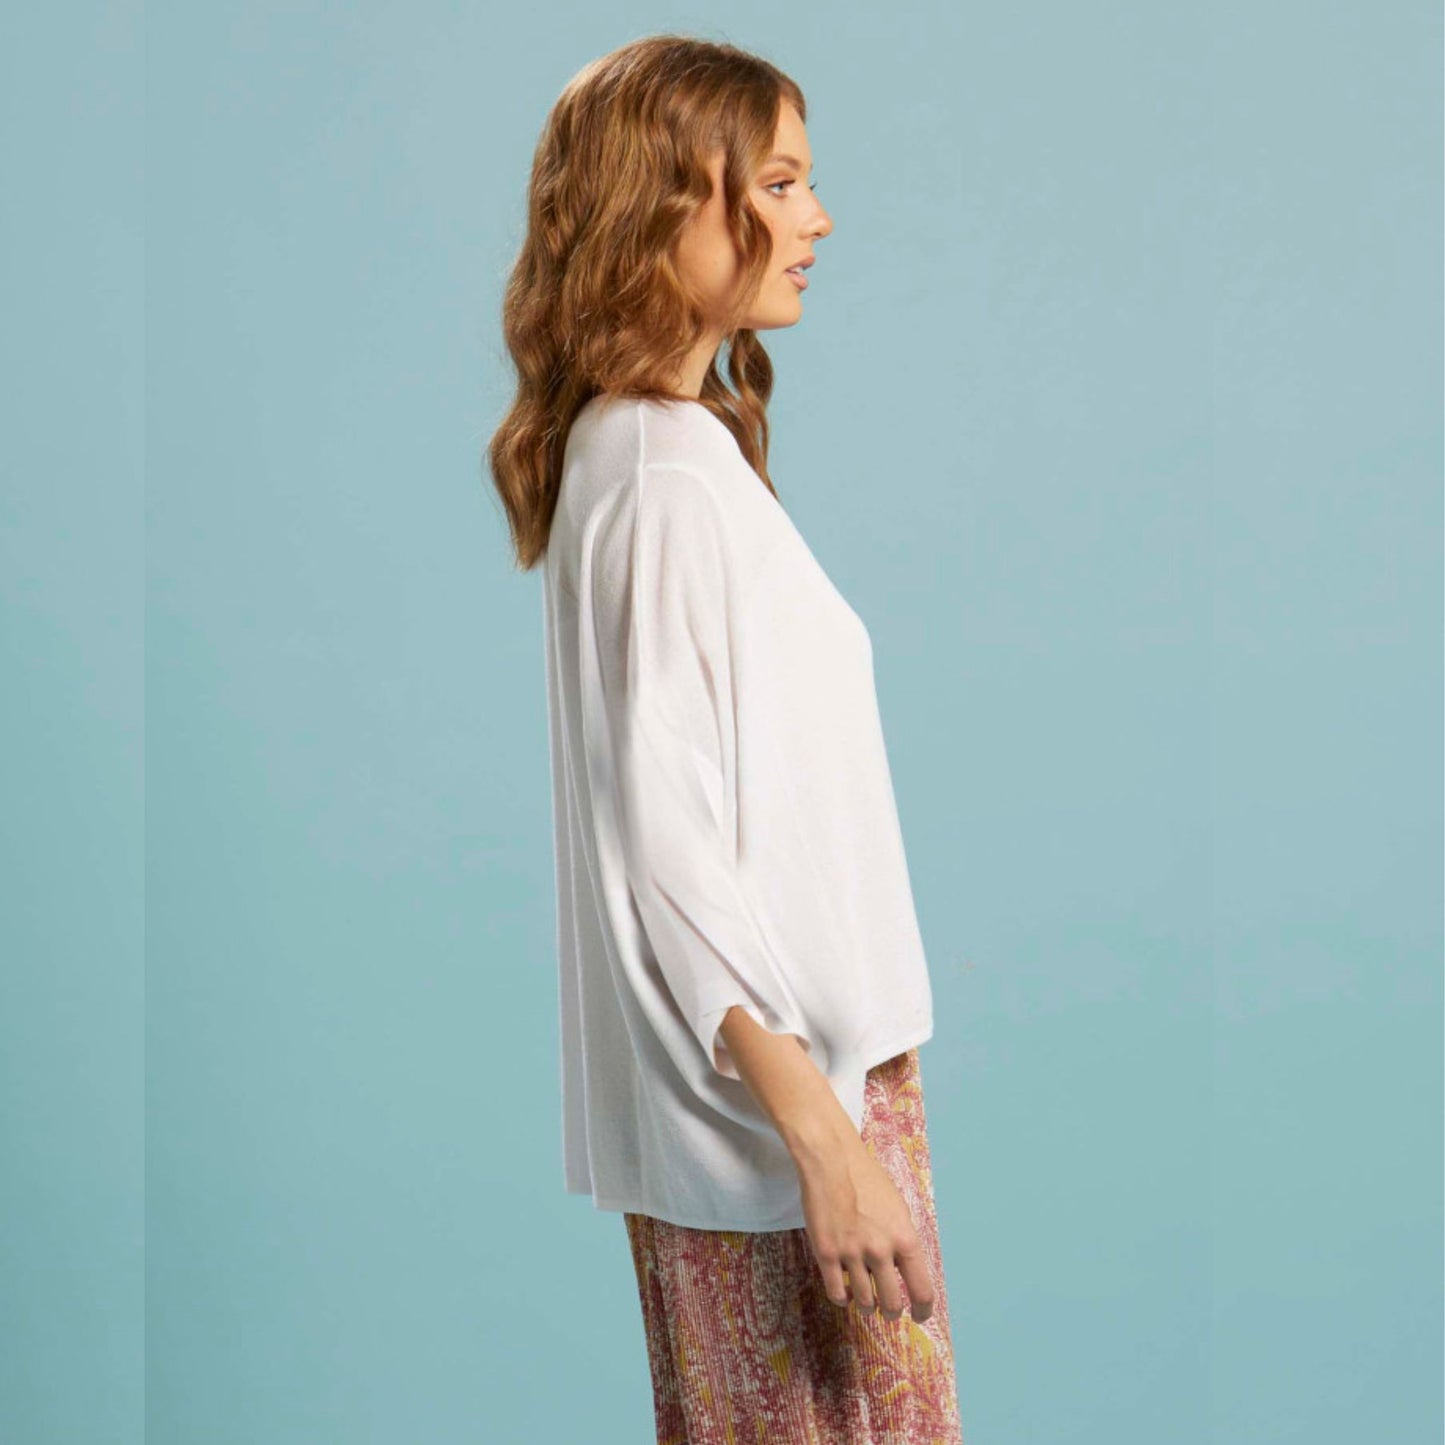 The boat neck shape on the Celestial knit from FATE + BECKER adds a touch of sophistication to any outfit. With a hi/lo hem and side splits, this lightweight knit in white achieves a modern and stylish look.